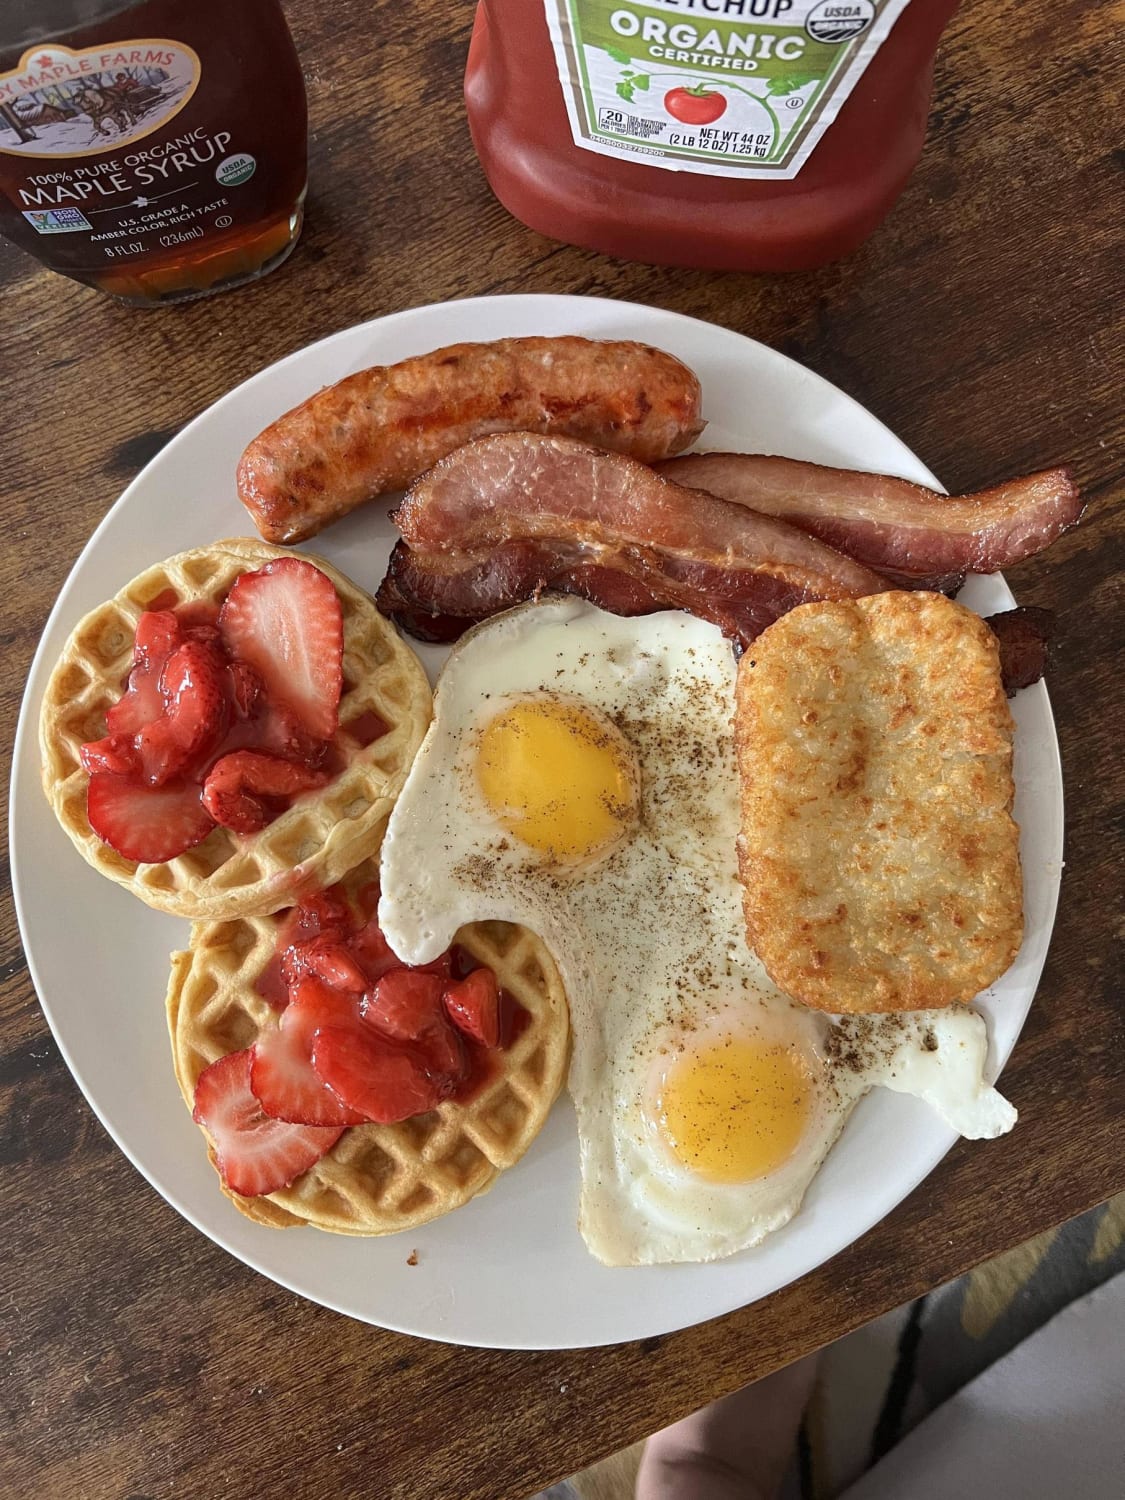 [Homemade] Breakfast, Italian sausage, apple smoked bacon, eggs, waffles with strawberry compote and a hash brown